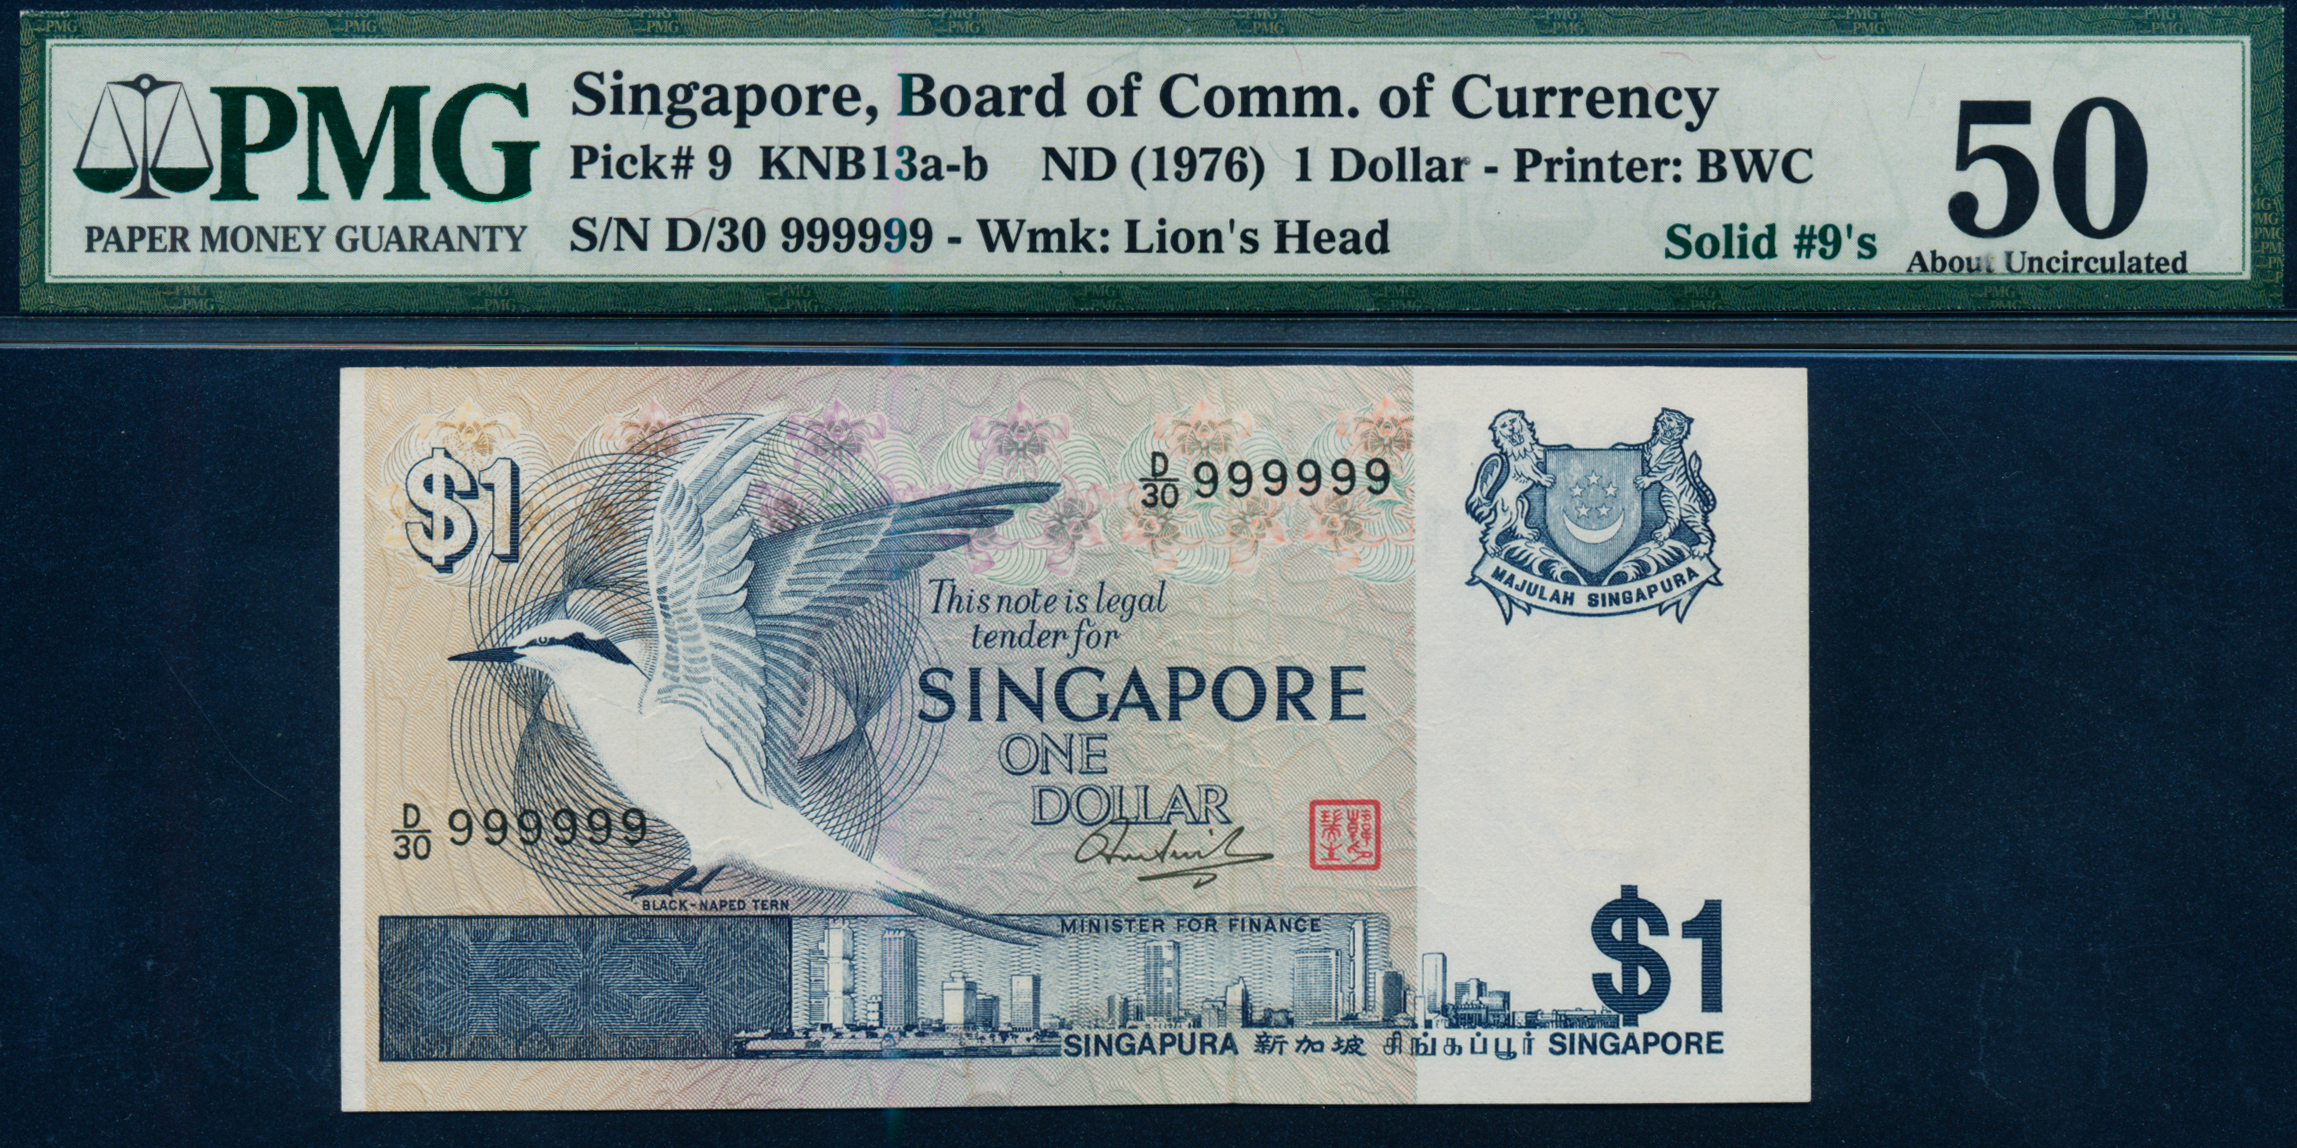 Singapore Bird 1976 $1 Solid Number D/30 999999 PMG 50 